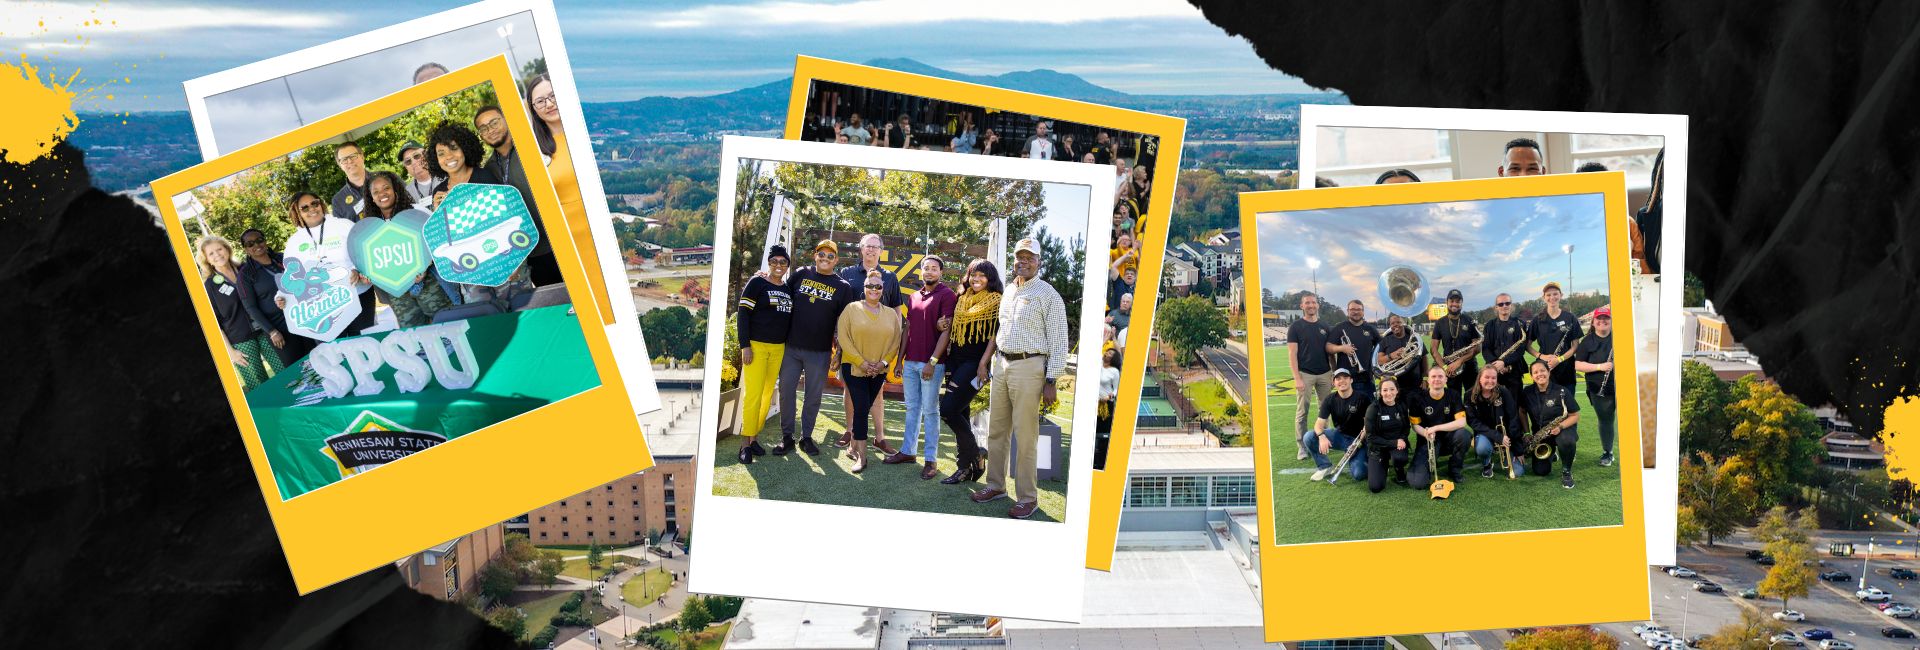 Three photos showing alumni at events overlapping each other and overlaid on the KSU Kennesaw Campus